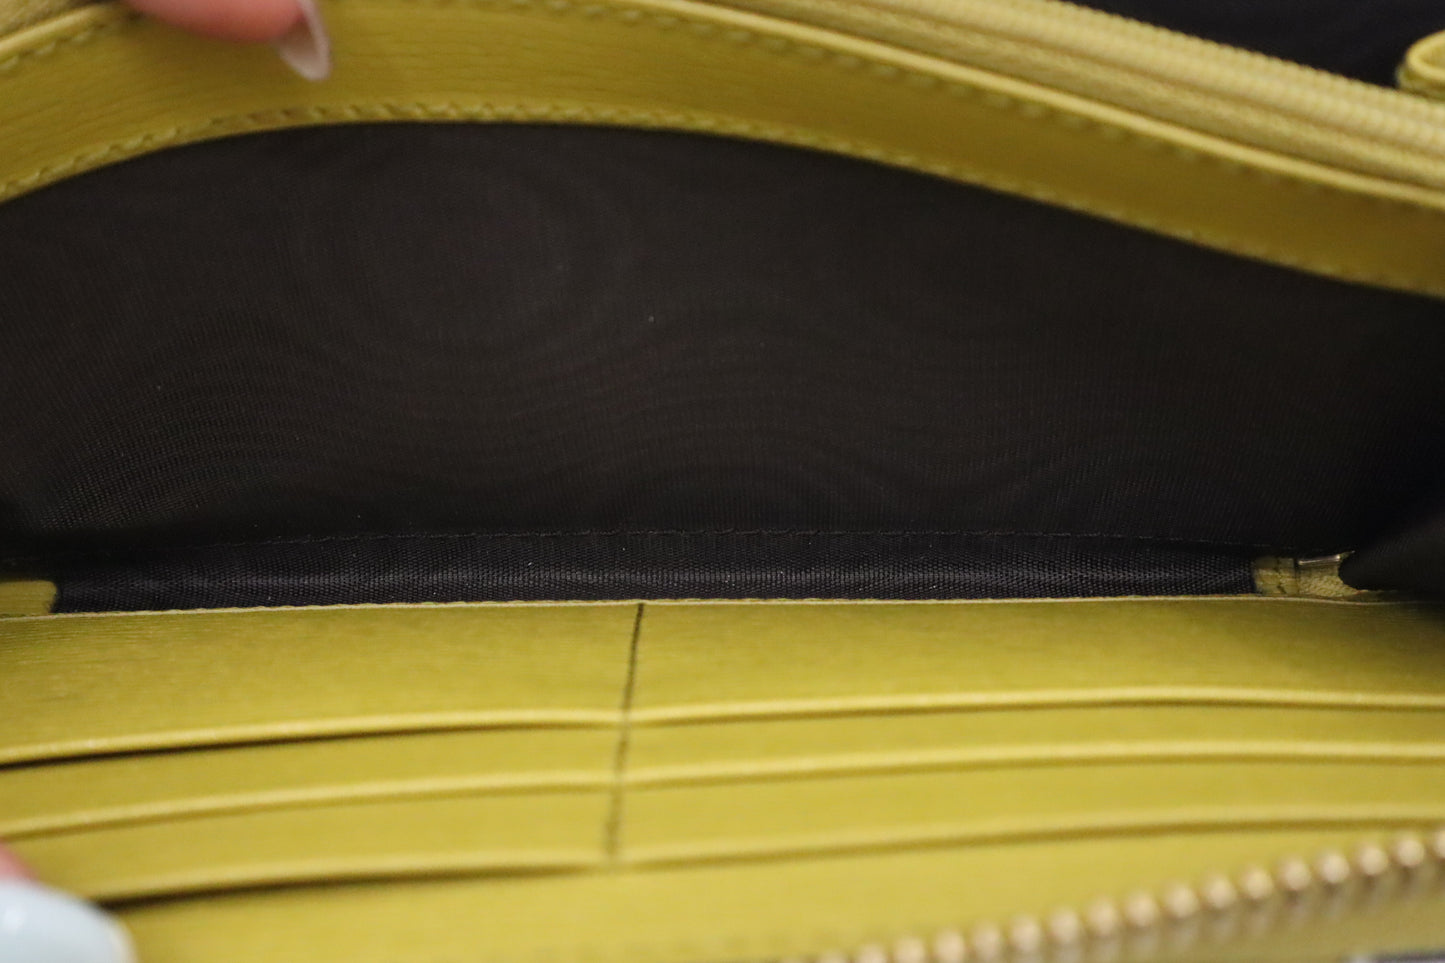 Gucci Heartbeat Zippy Long Wallet in Yellow Leather